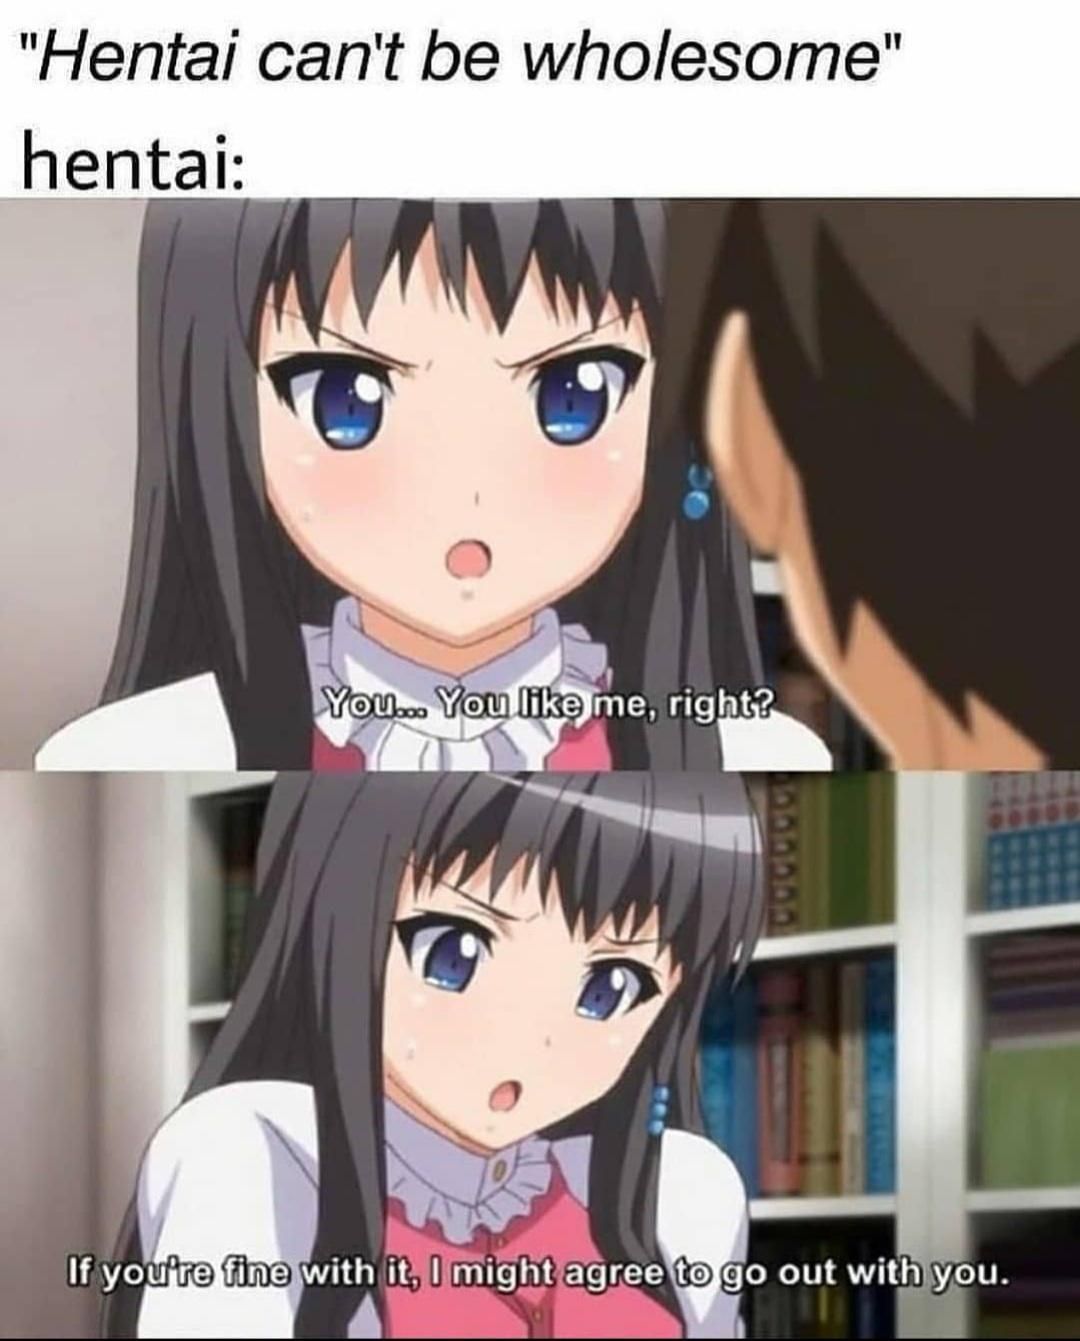 Hentai can be wholesome